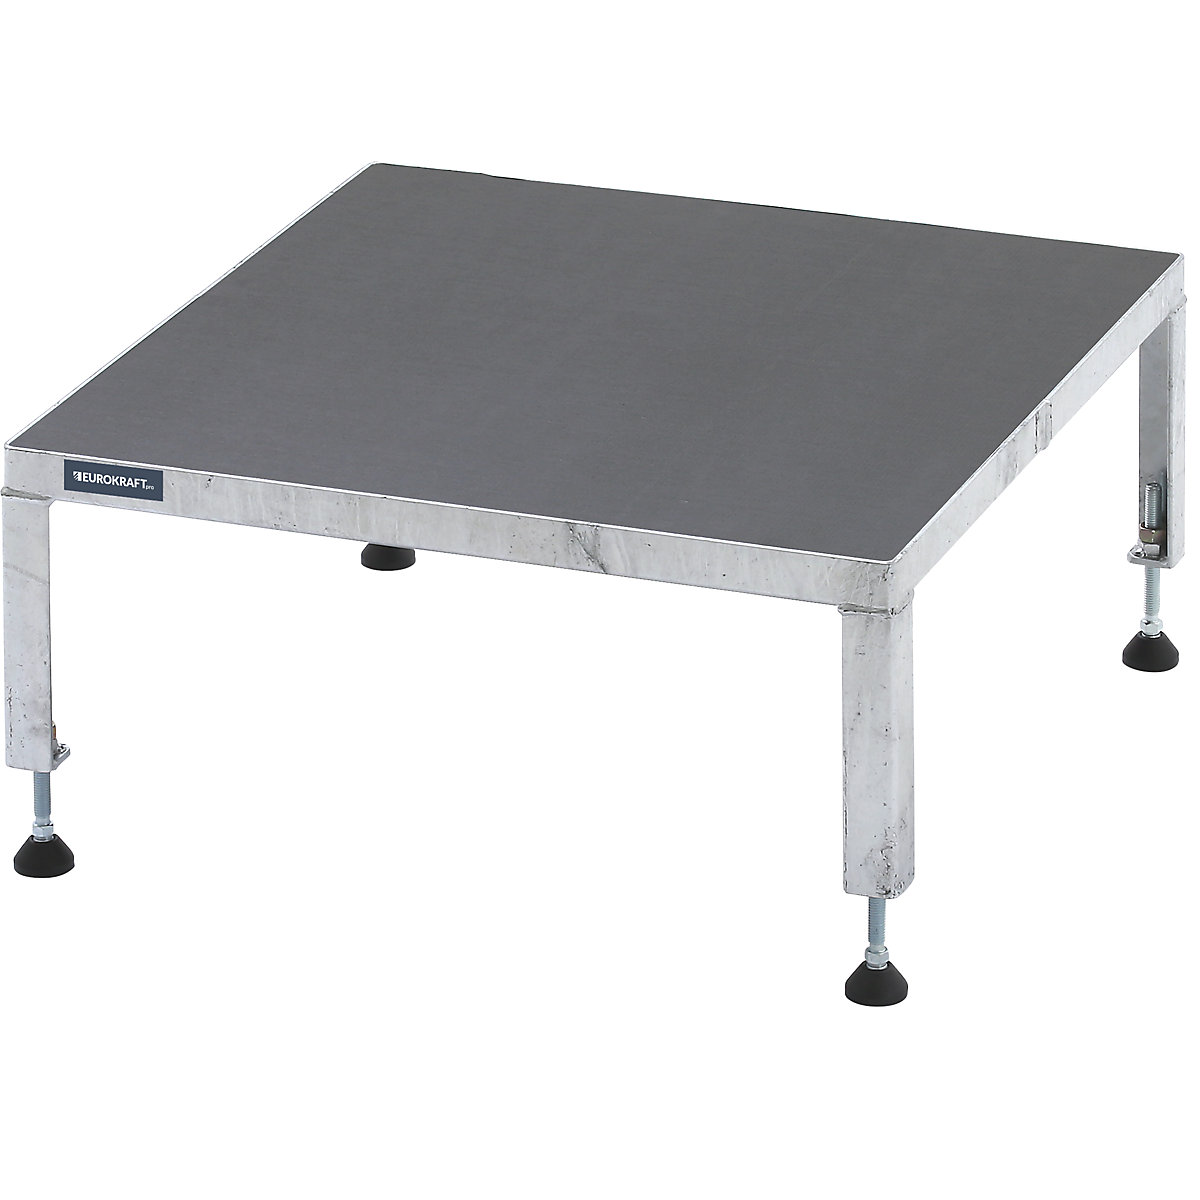 Working platform, height adjustable from 255 – 320 mm – eurokraft pro, with phenolic plywood panel, platform LxW 610 x 610 mm, hot dip galvanised-11